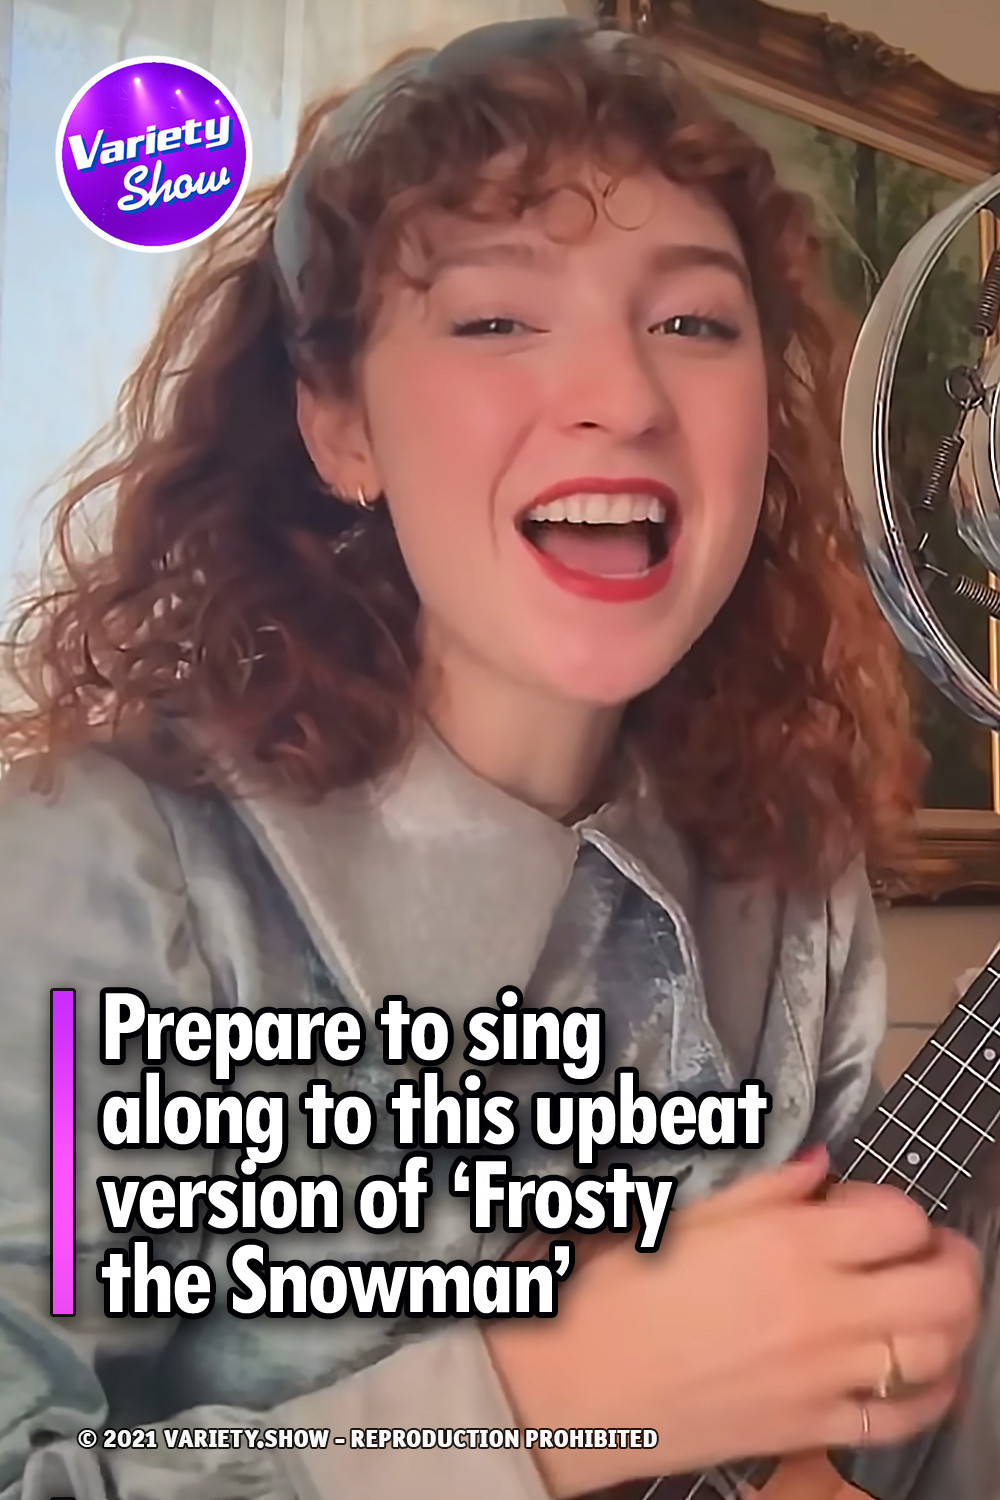 Prepare to sing along to this upbeat version of ‘Frosty the Snowman’